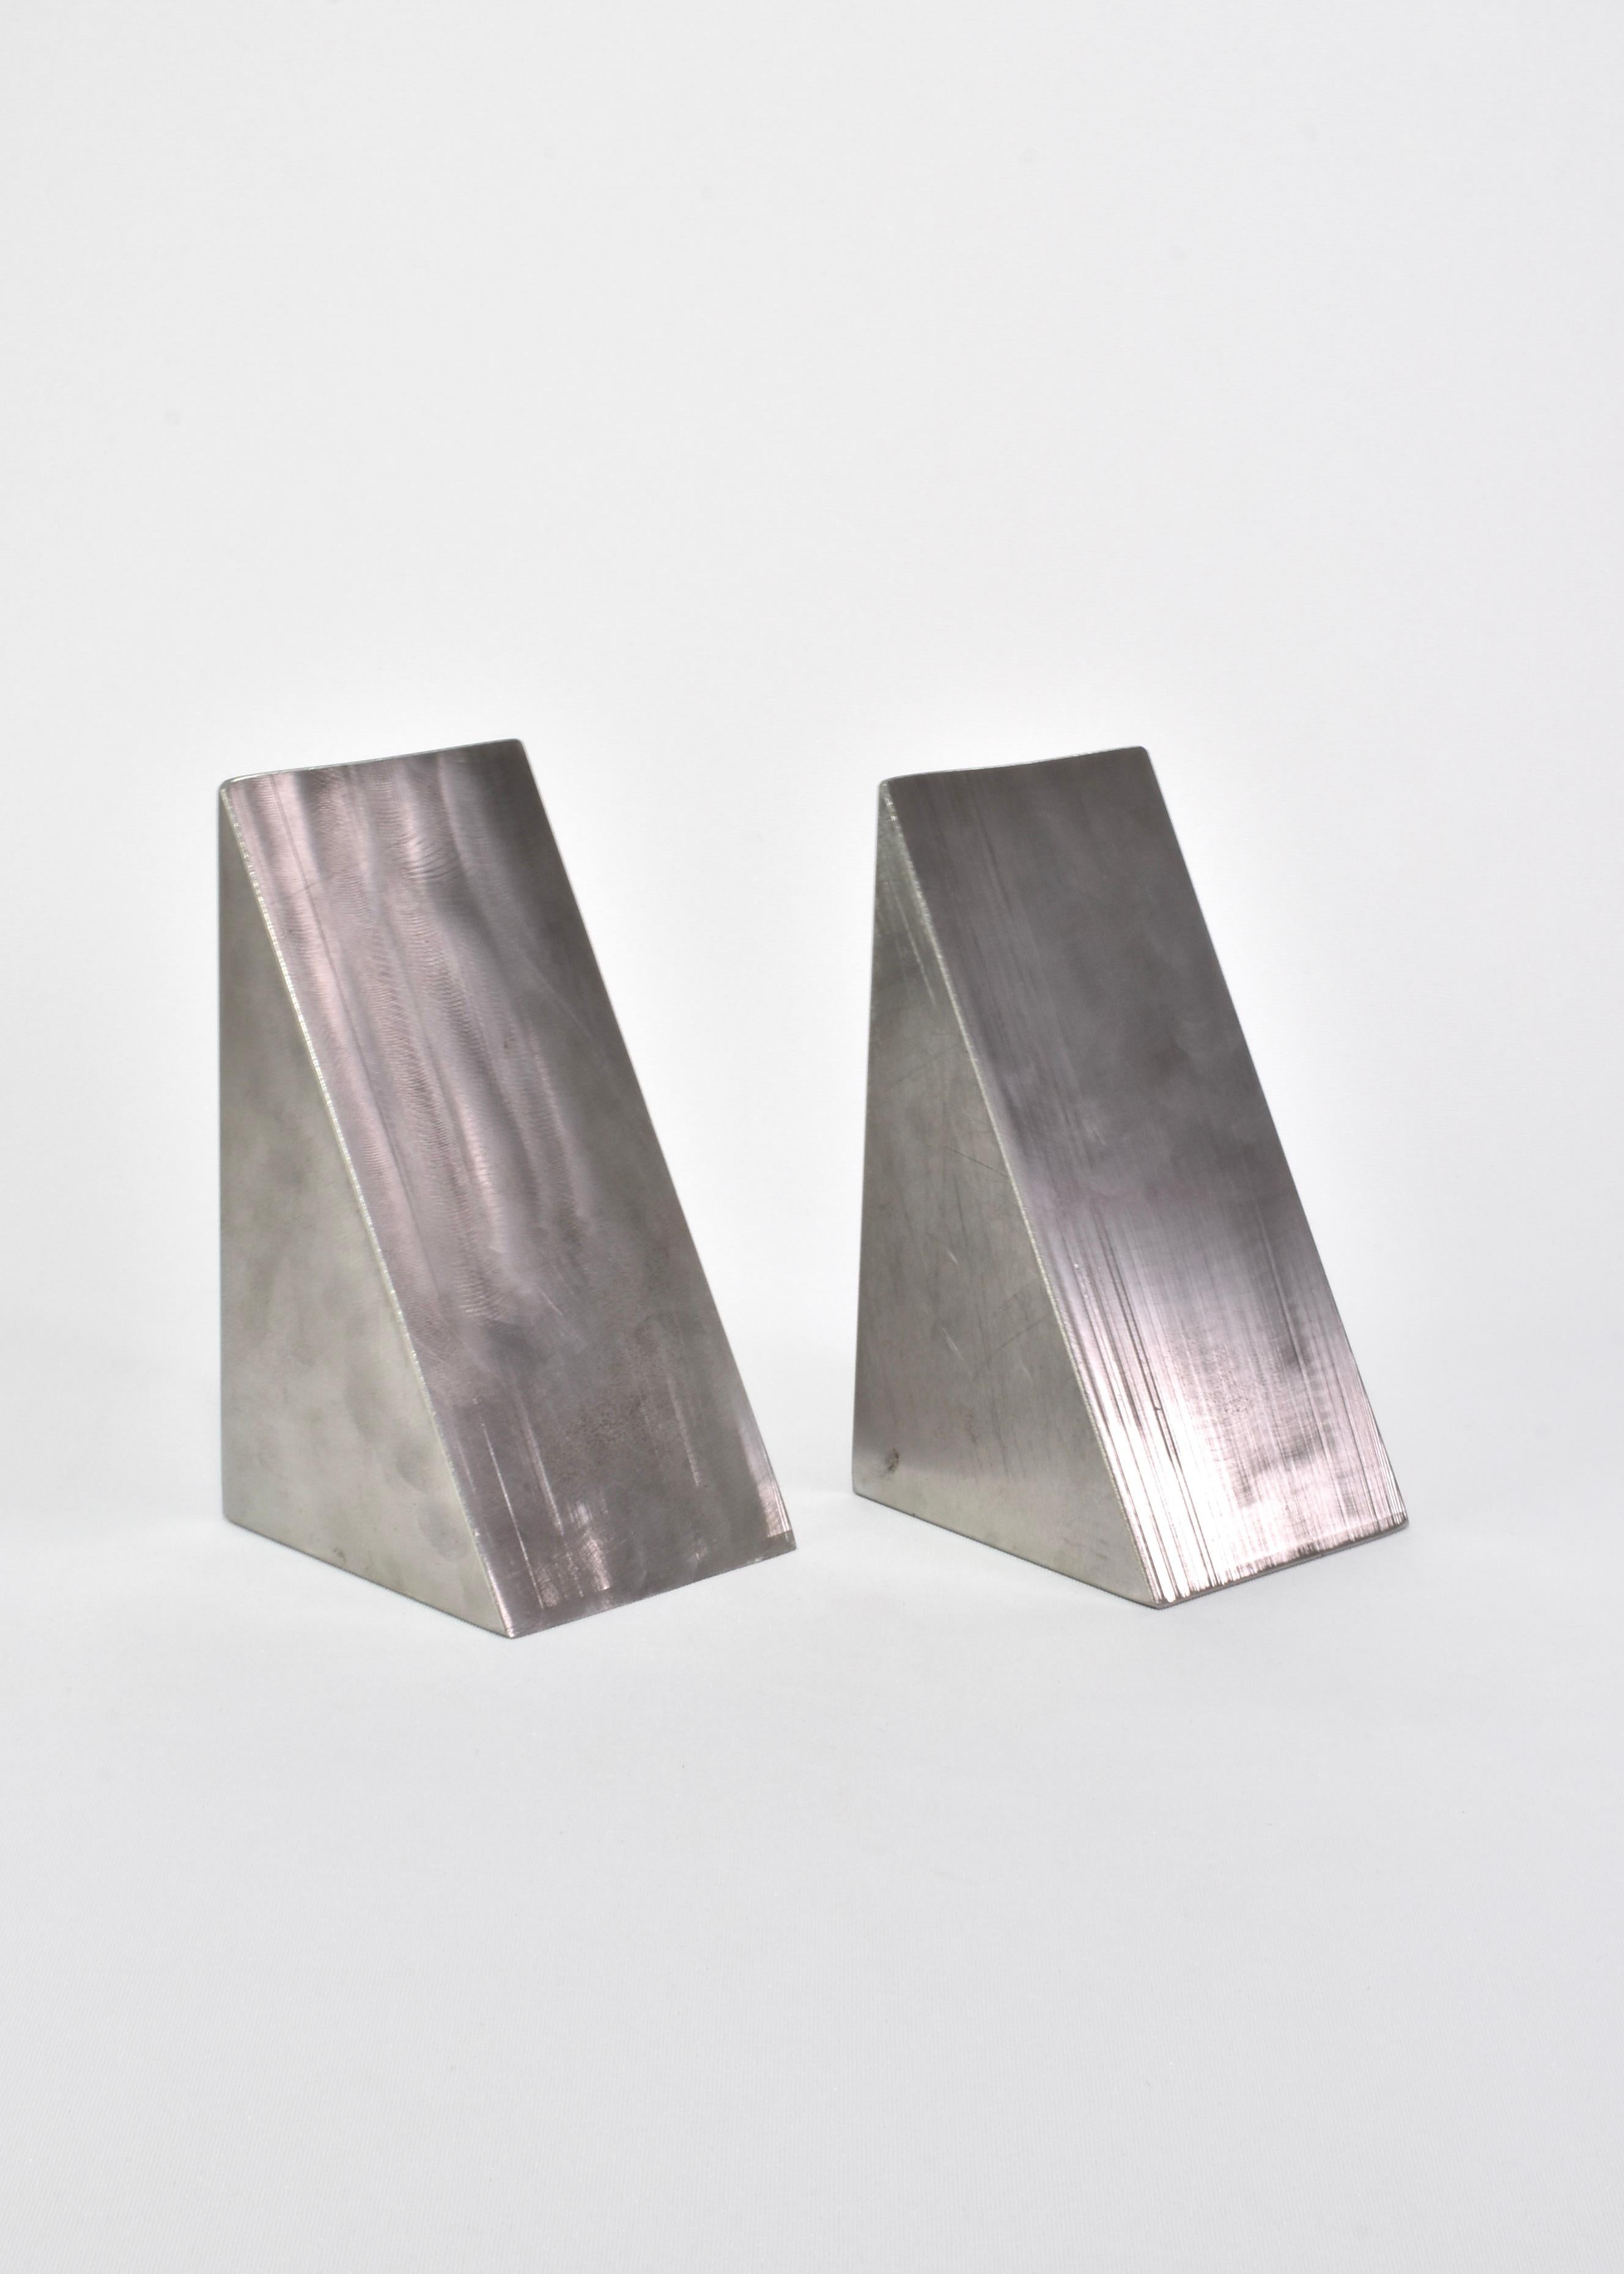 Sculptural vintage bookends in solid steel, set of two.

Please note these are very heavy, each weighs 20 pounds and will be shipped in a custom wooden box.